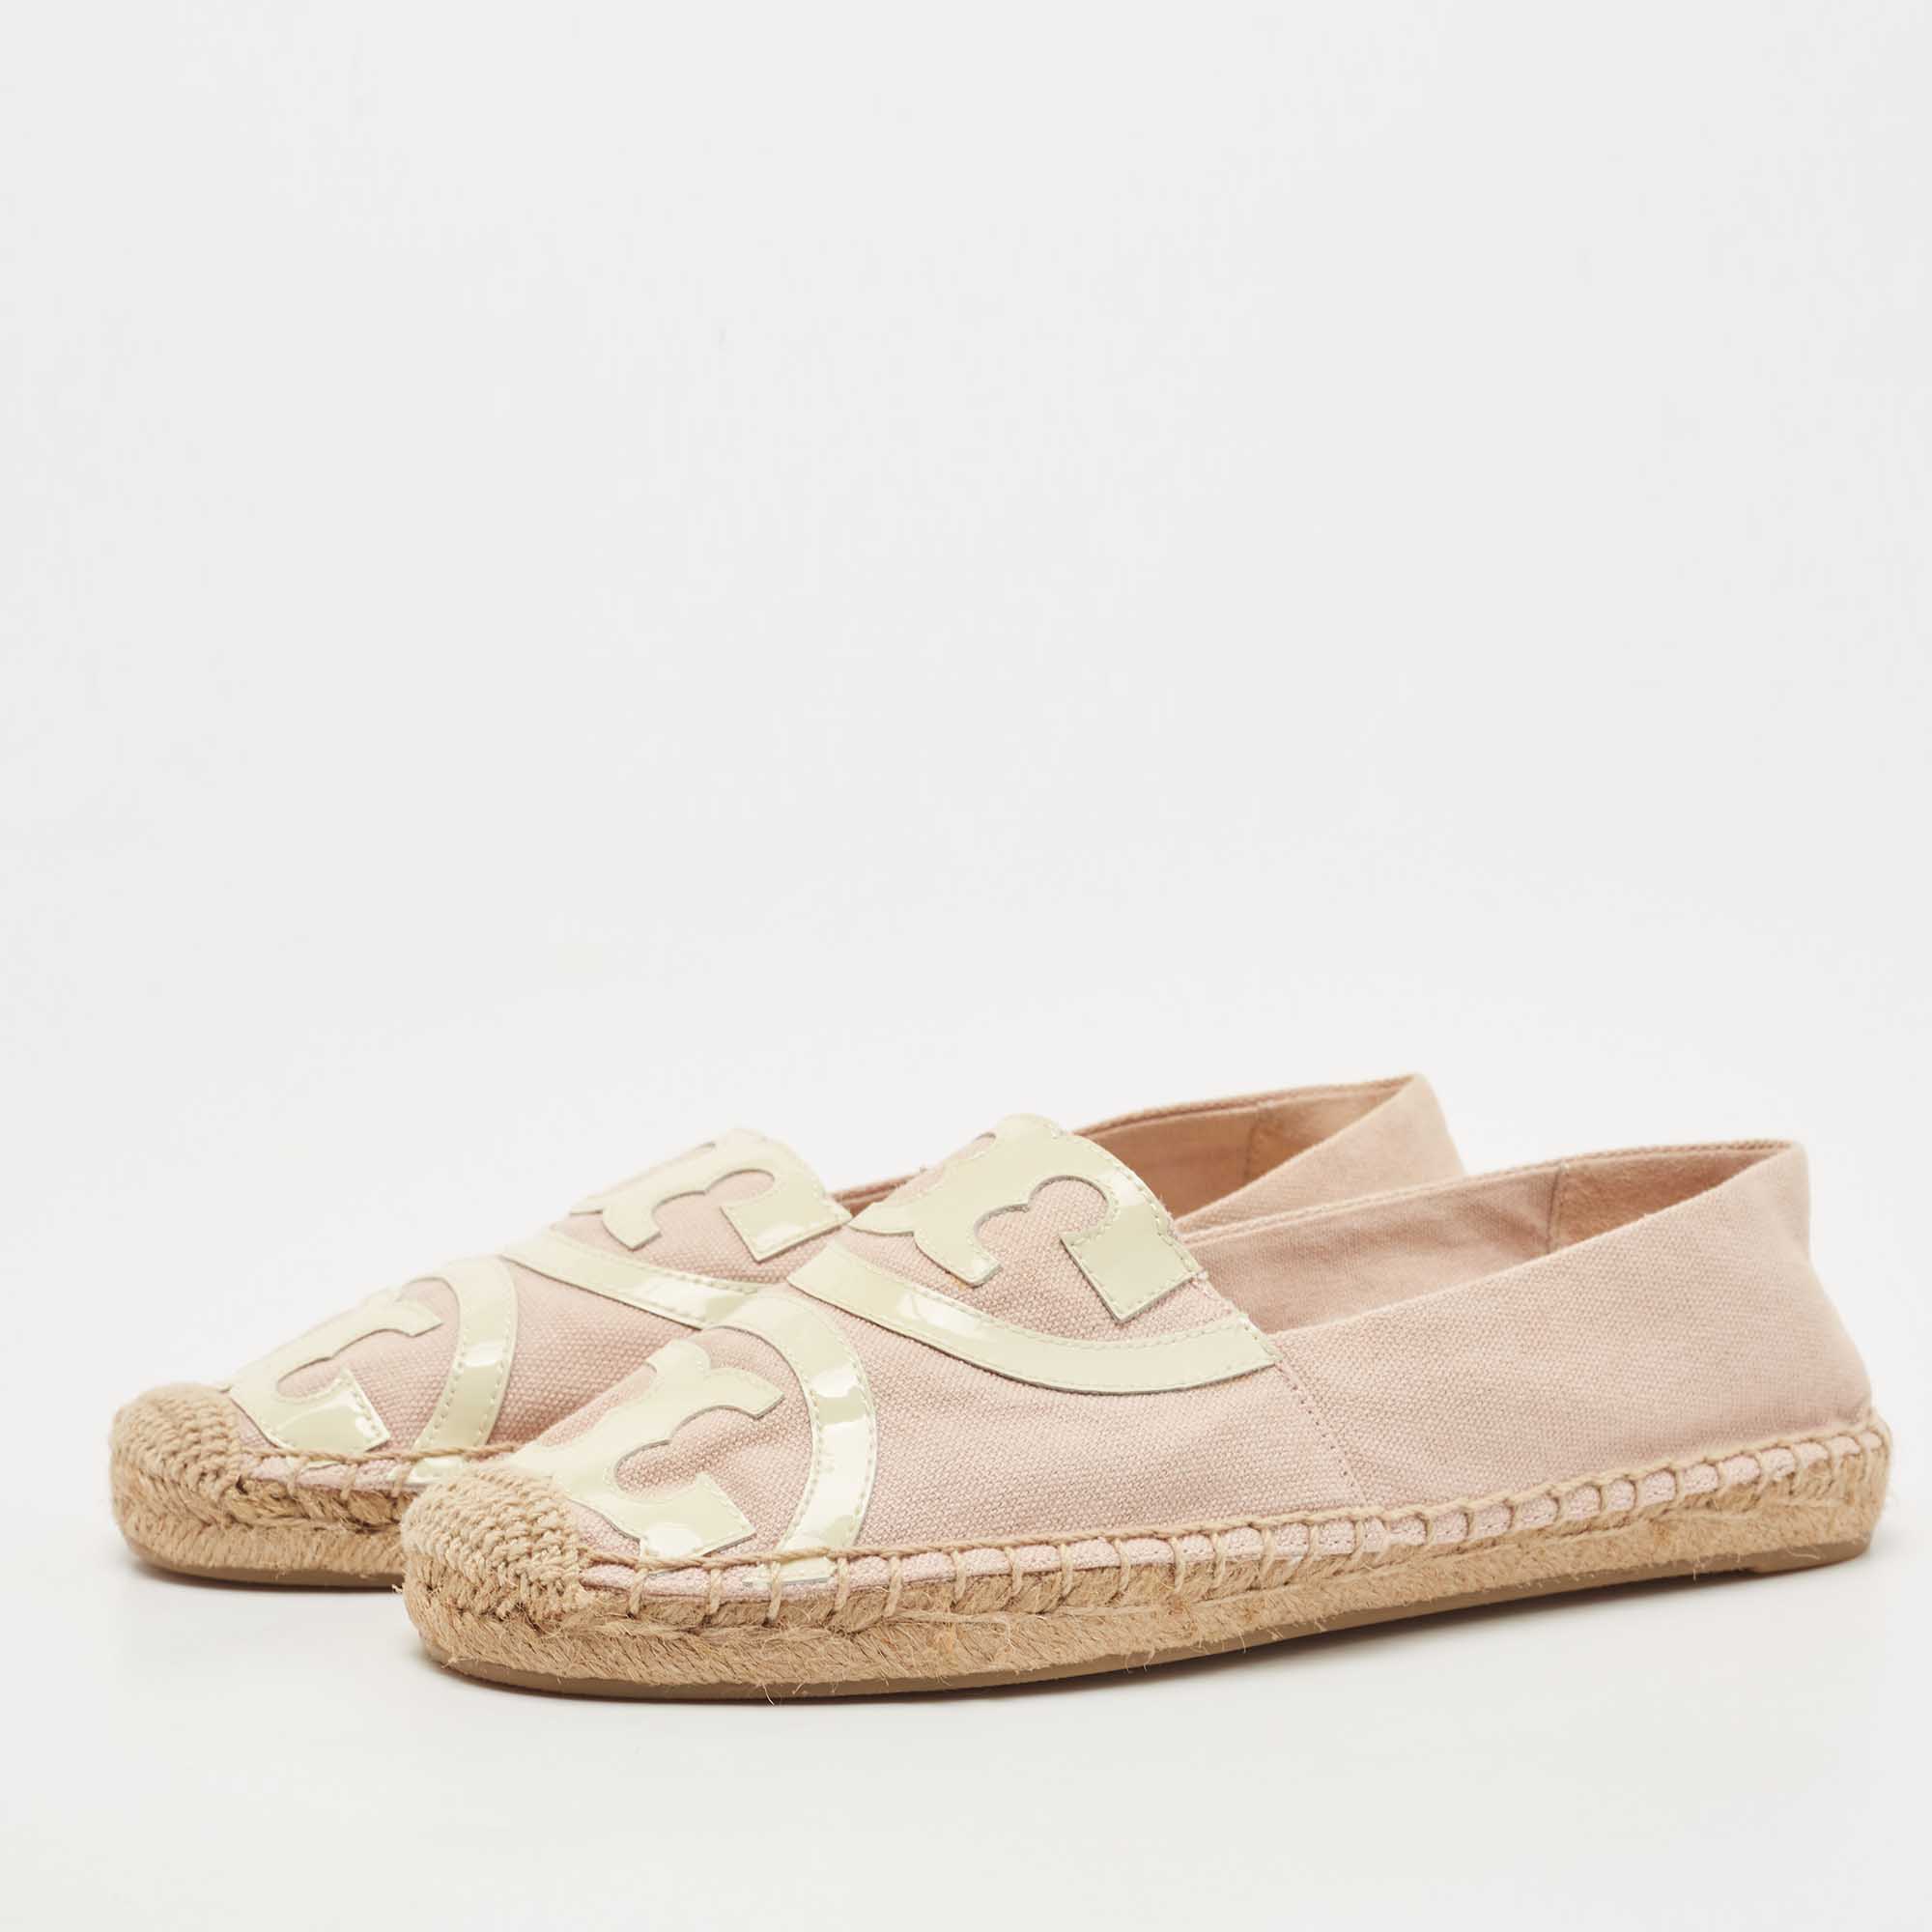 

Tory Burch Pink/Off White Canvas and Patent Leather Poppy Espadrille Flats Size